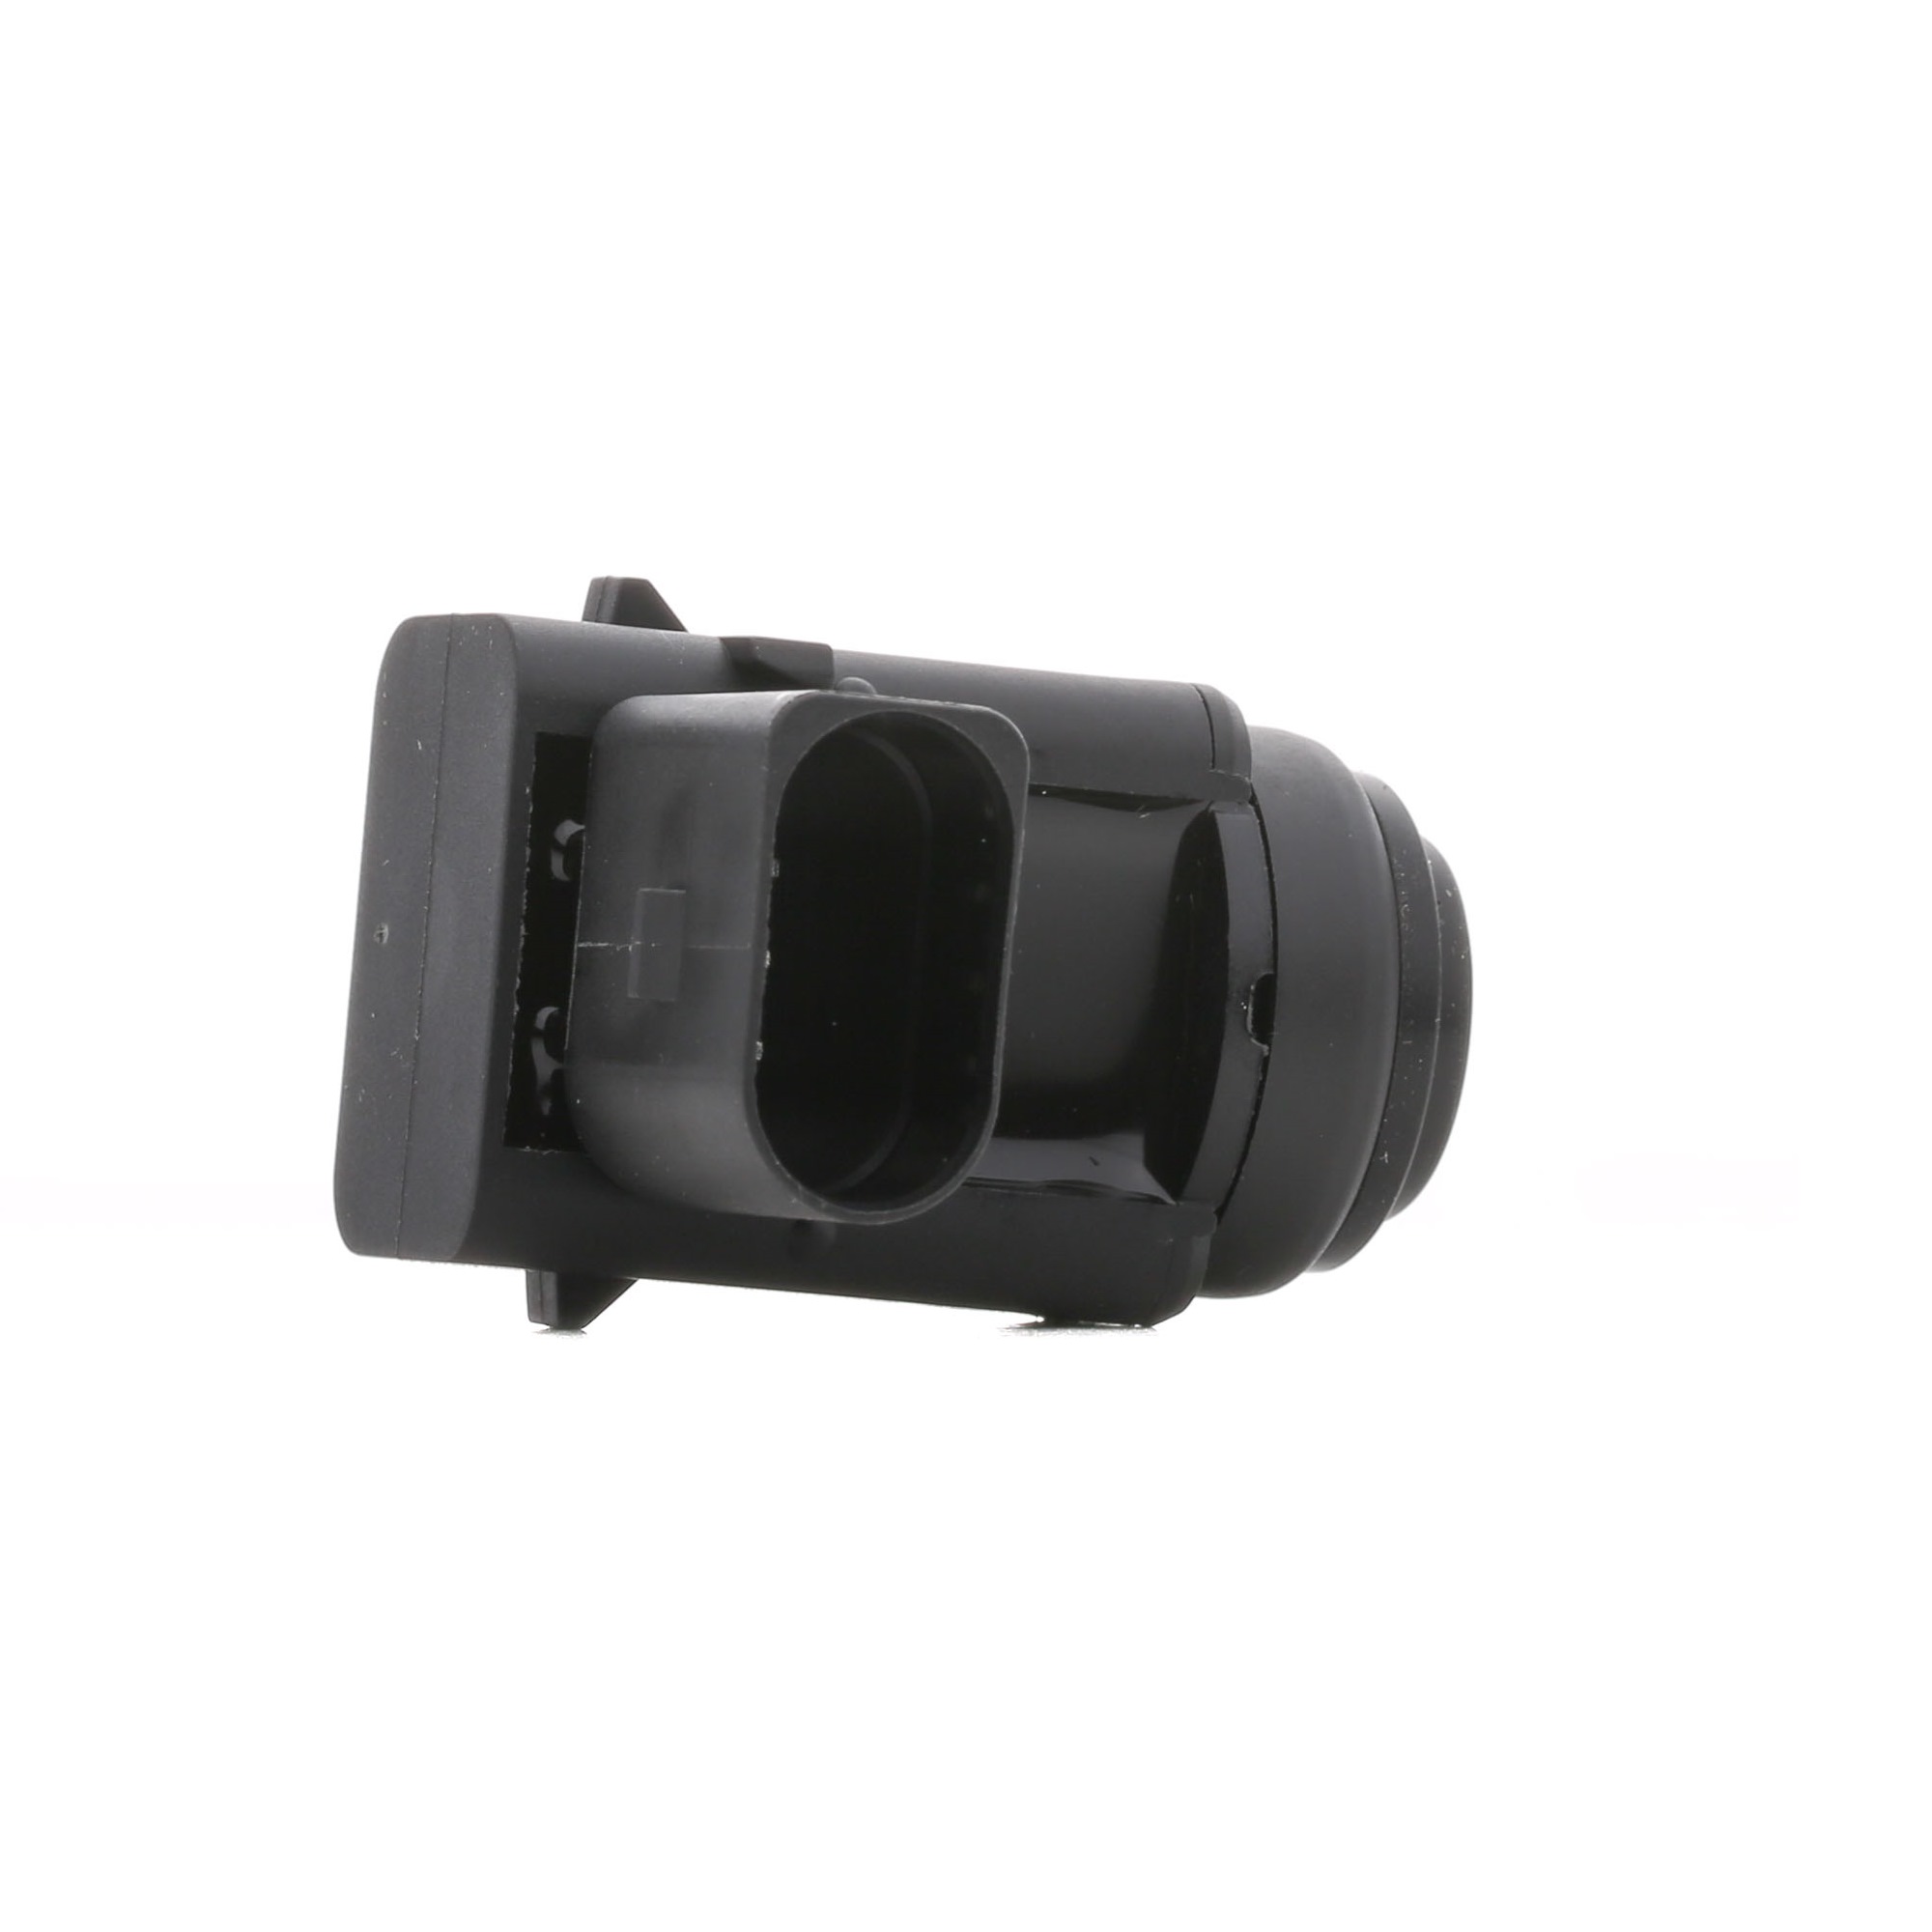 Seat Parking sensor NTY EPDC-AU-012 at a good price